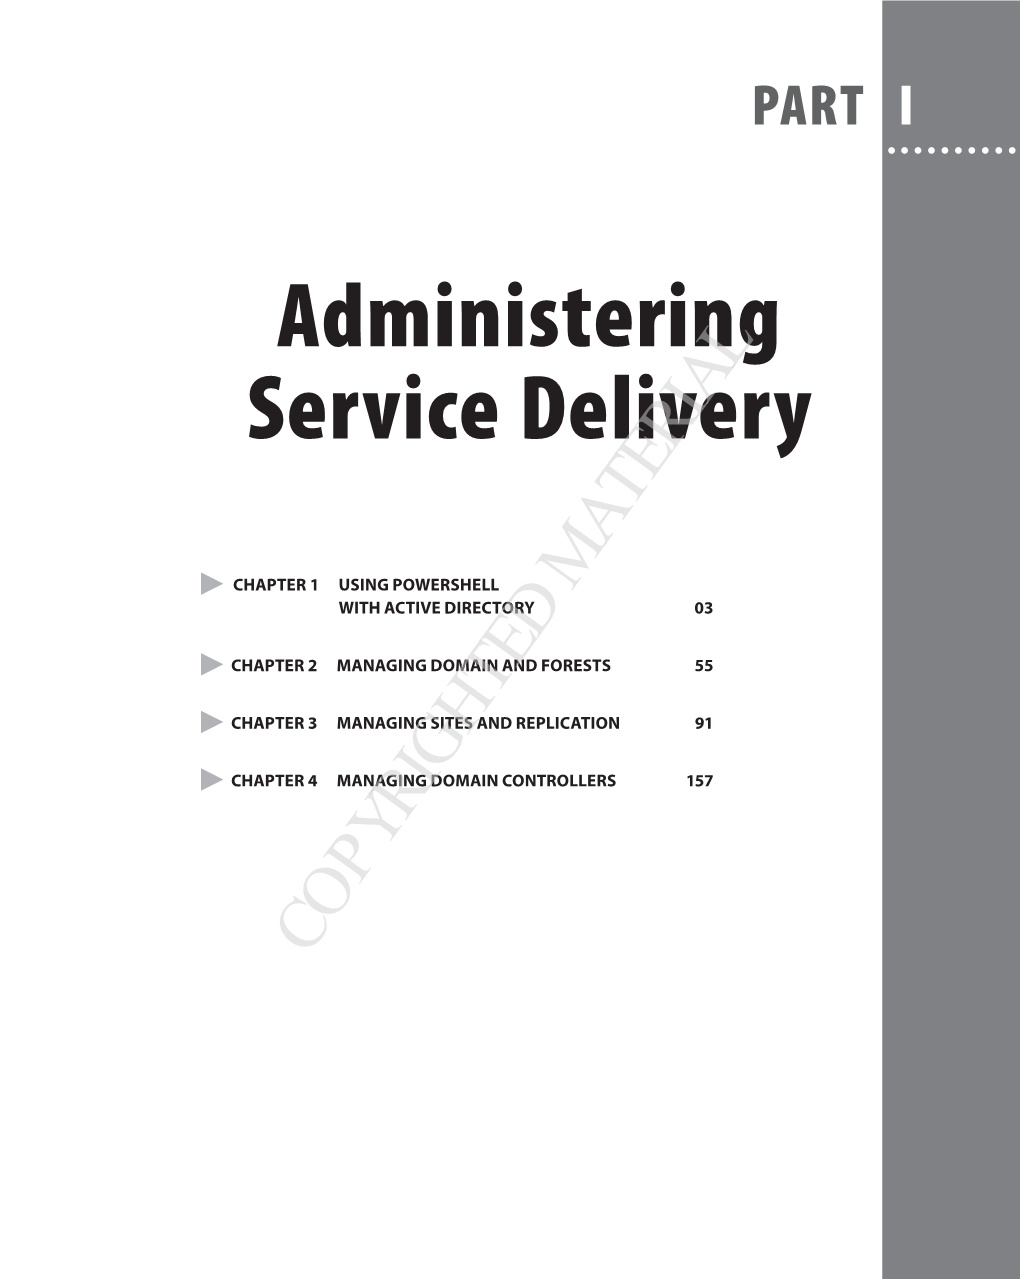 Administering Service Delivery